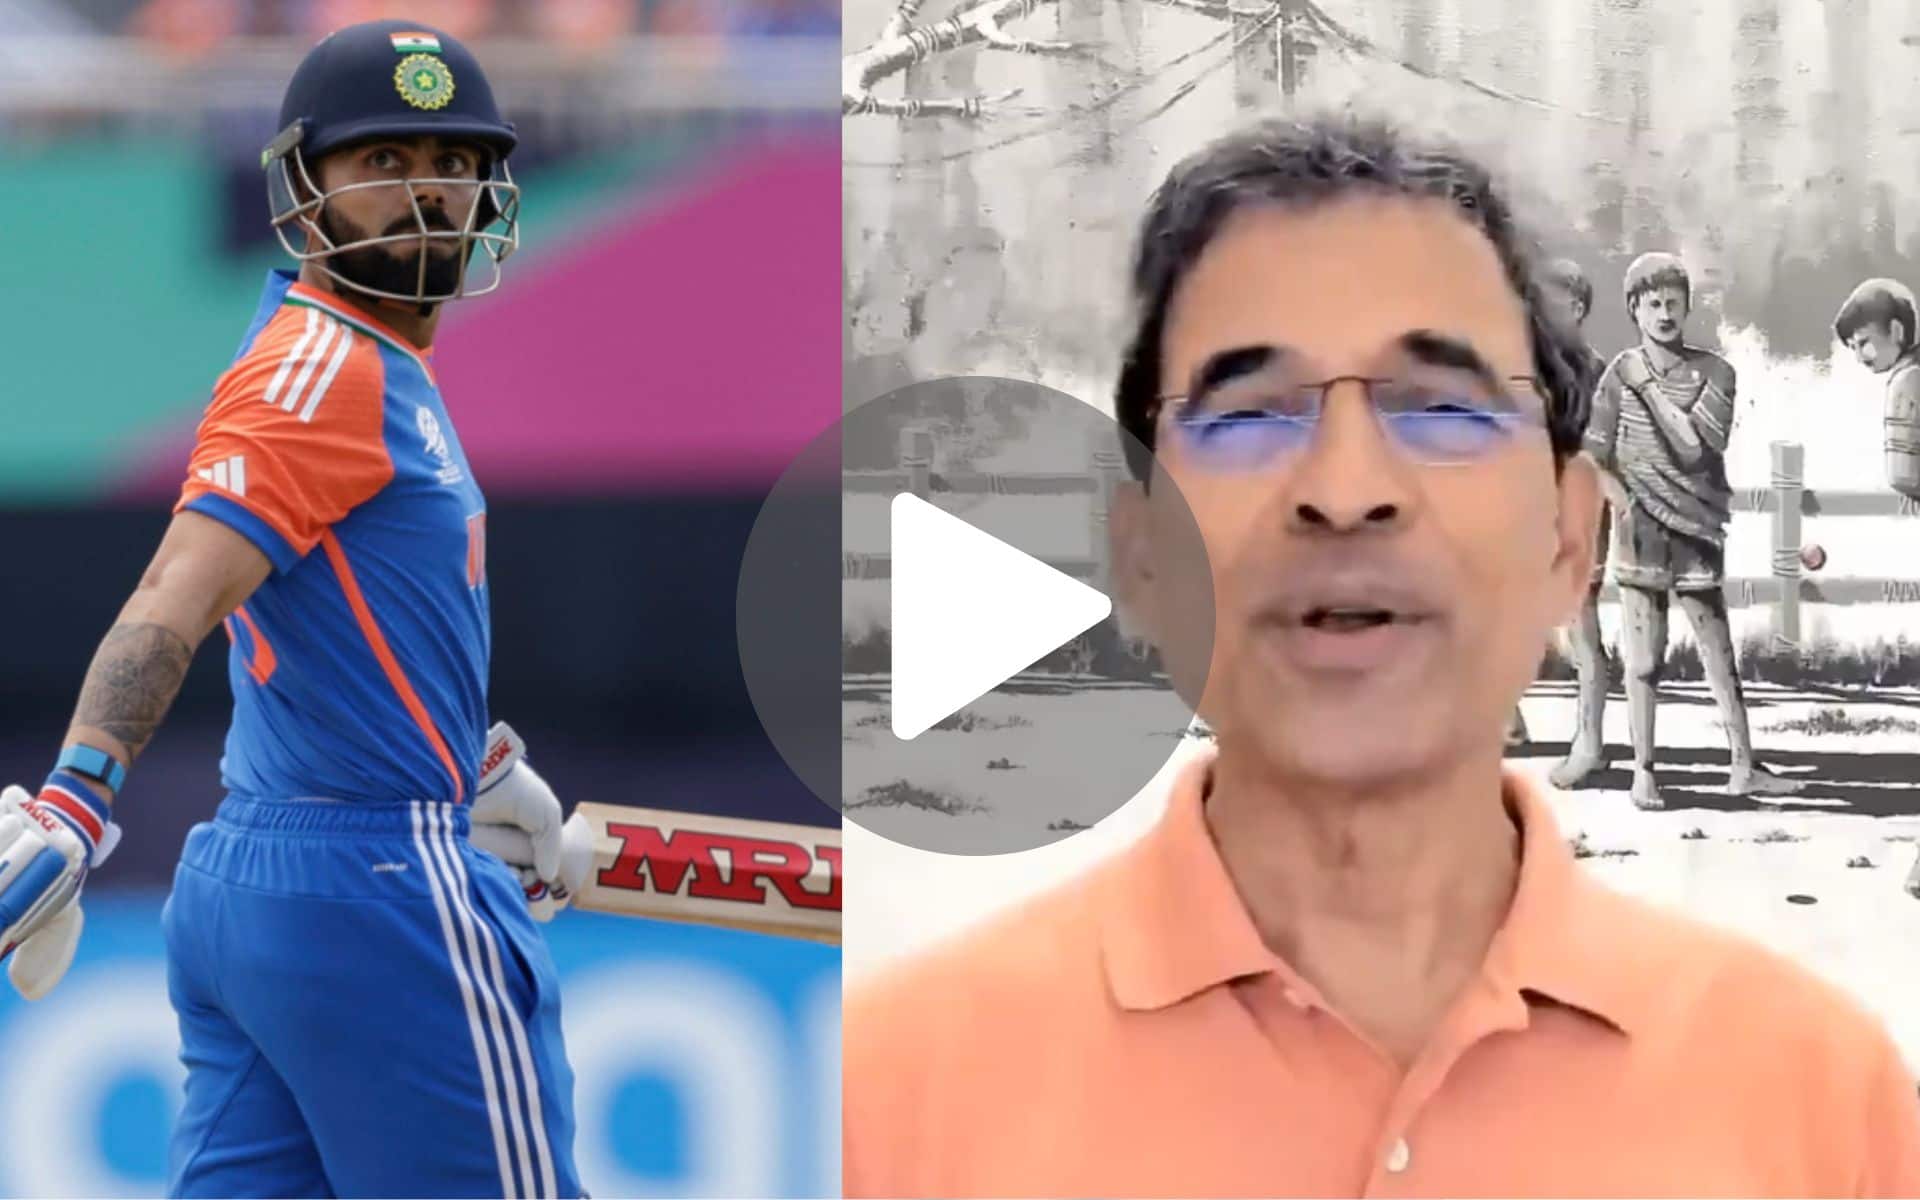 [Watch] Bhogle Shares A Heart-Touching Story About Kohli's Gesture Towards Cancer Survivor